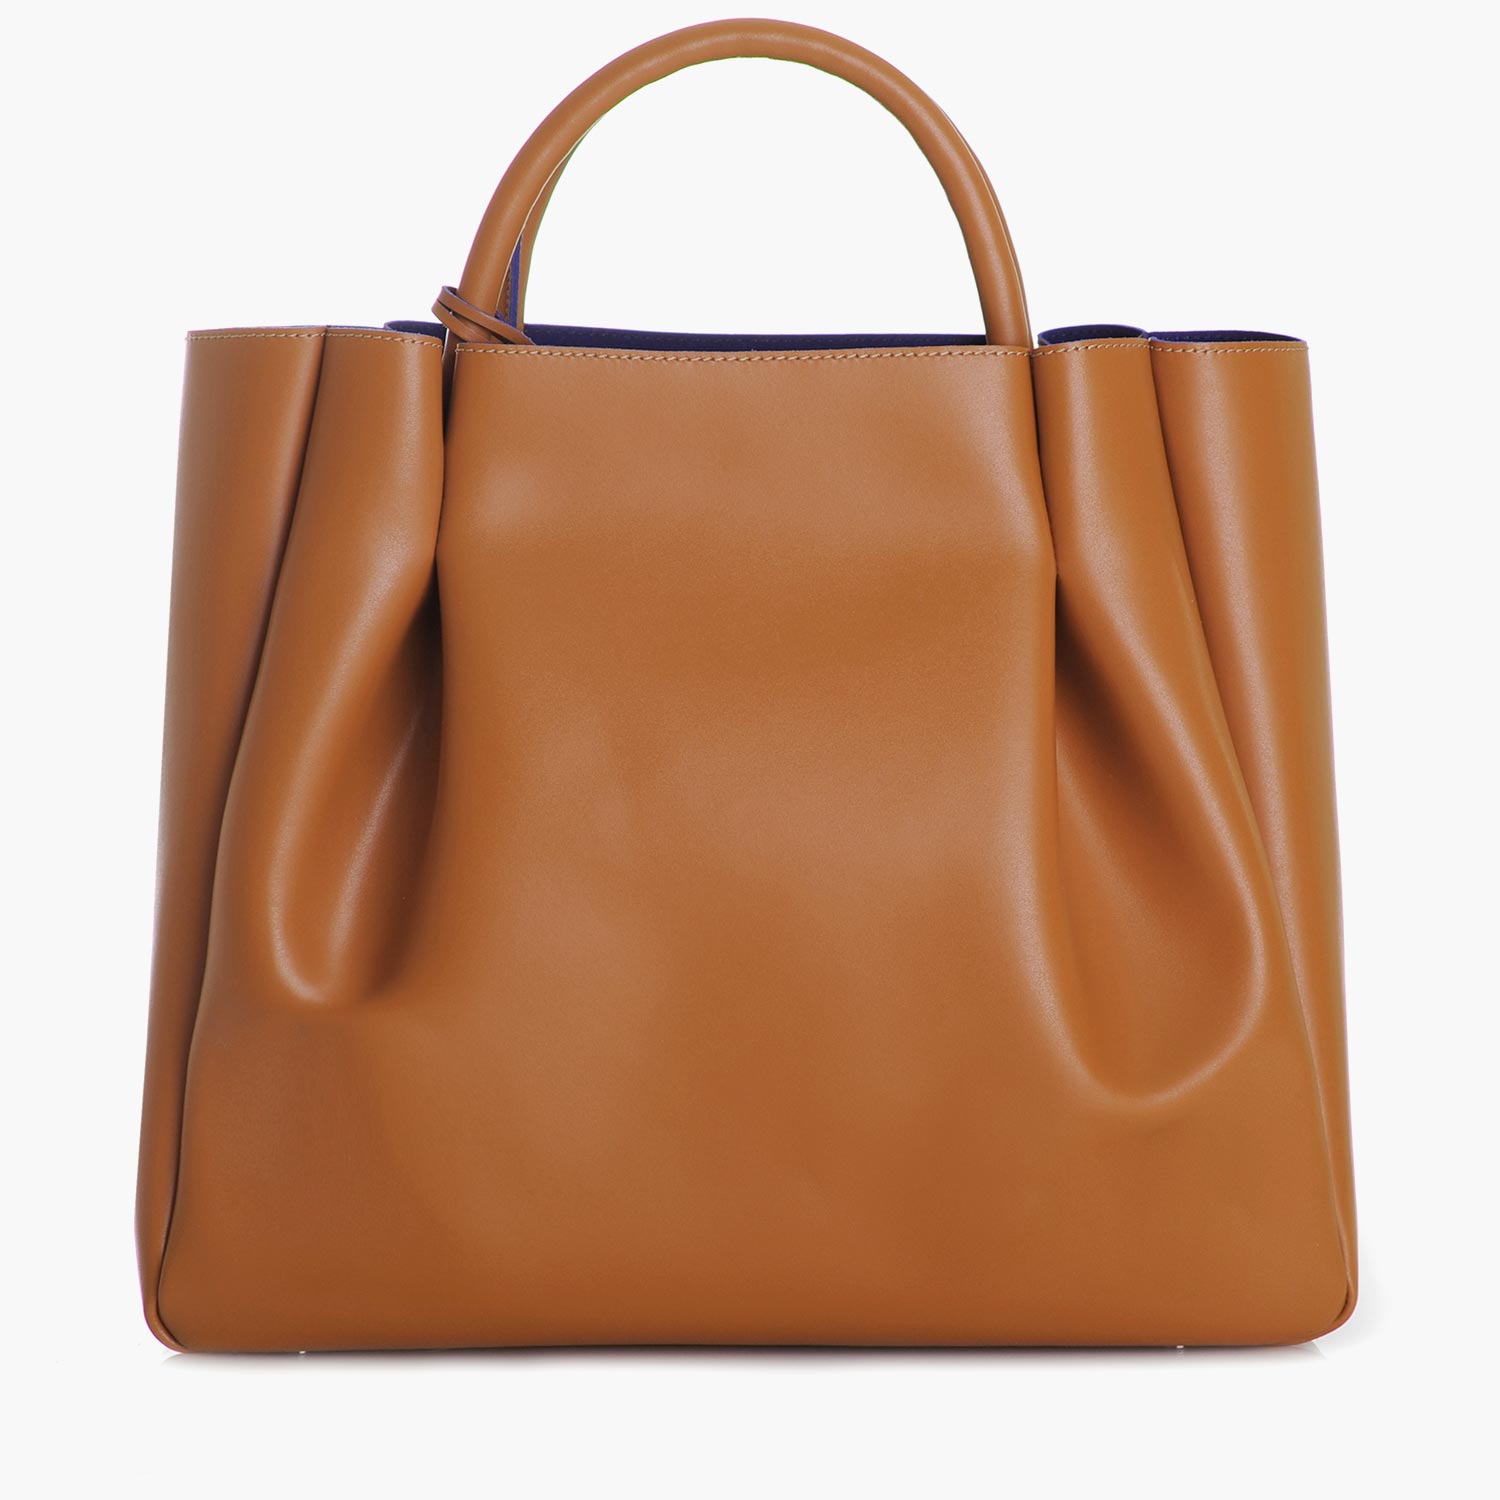 Buy TAN LEATHER PURSE for Women Online in India